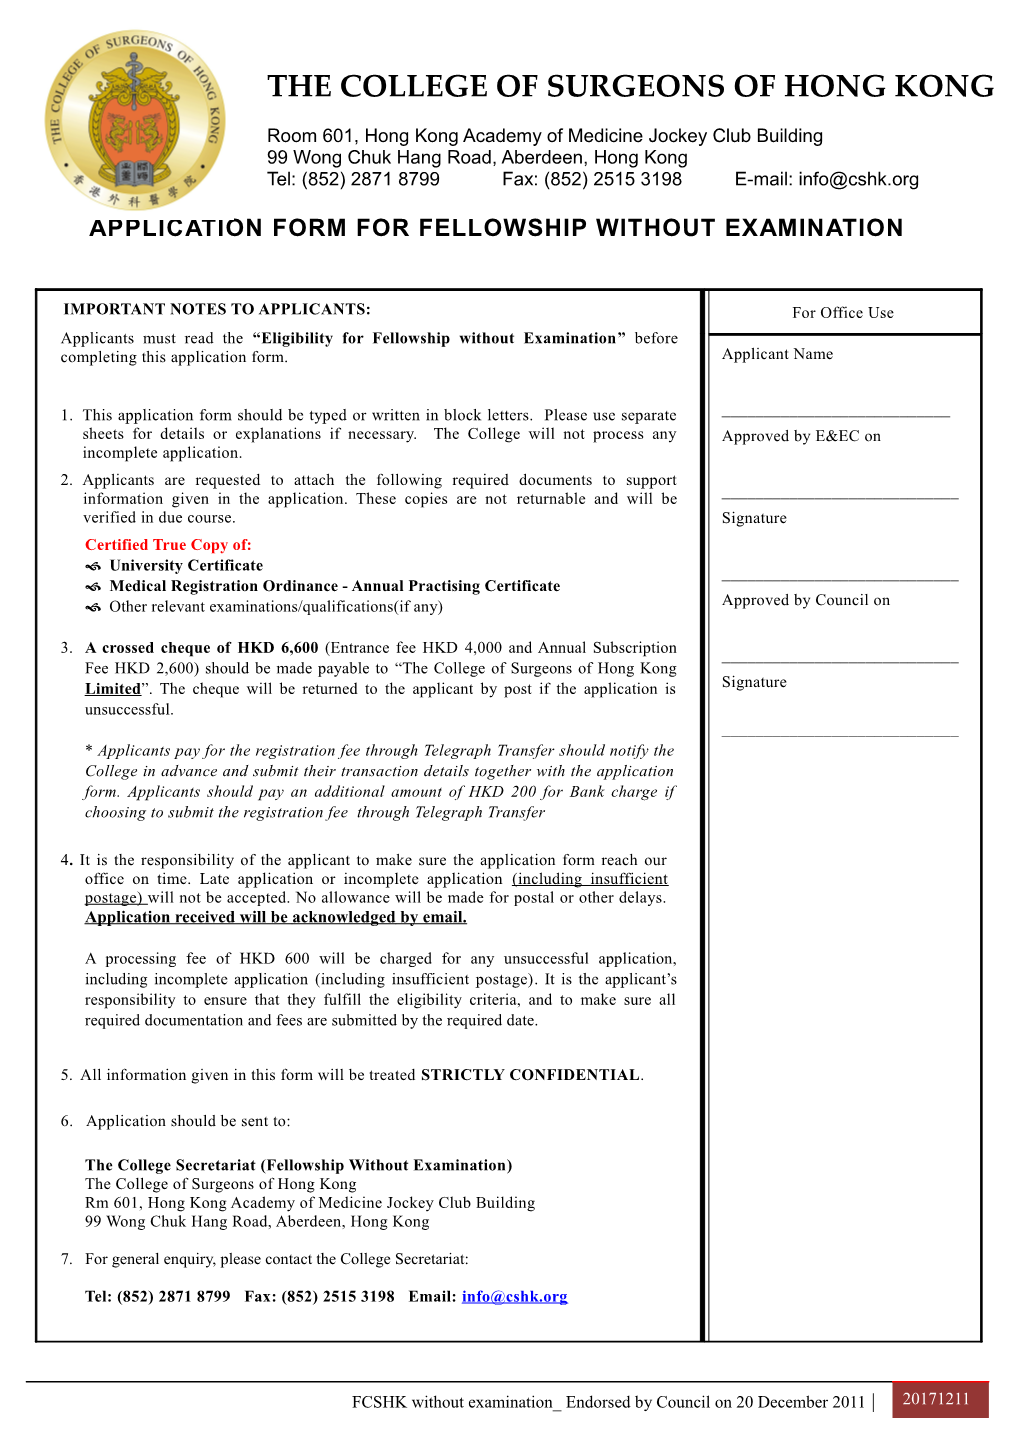 Application Form for Administrative and Executive Posts s1